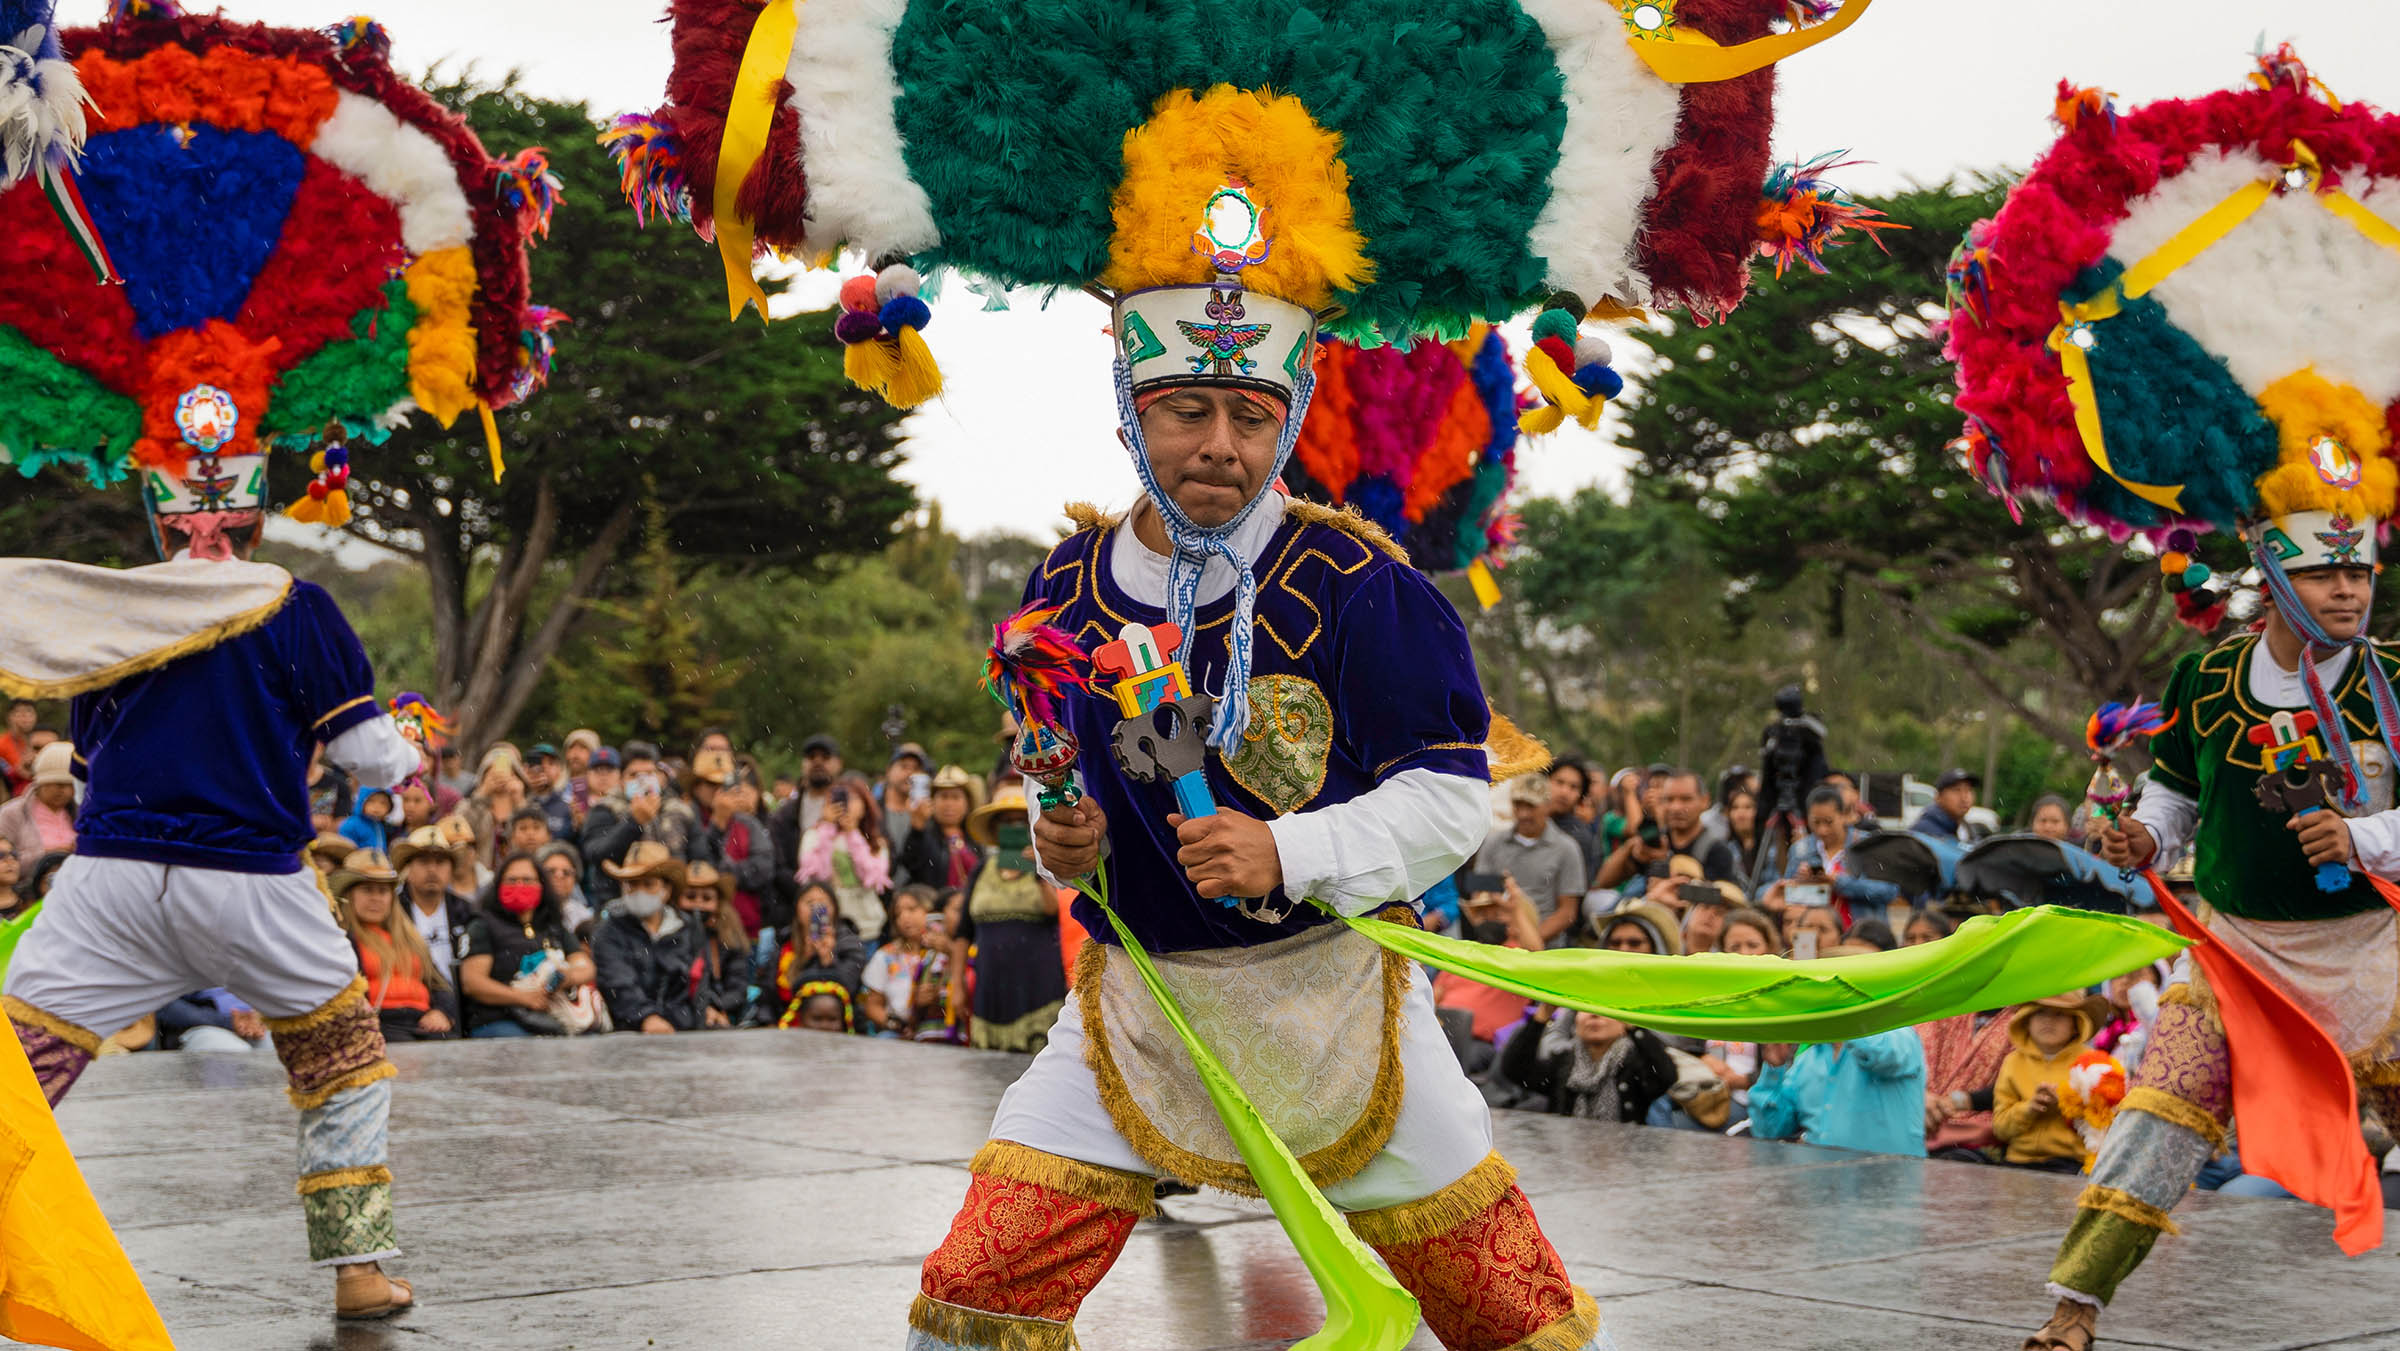 Capturing the Spirit and Vibrancy of Oaxaca by the Sea - NYX Awards Winner 